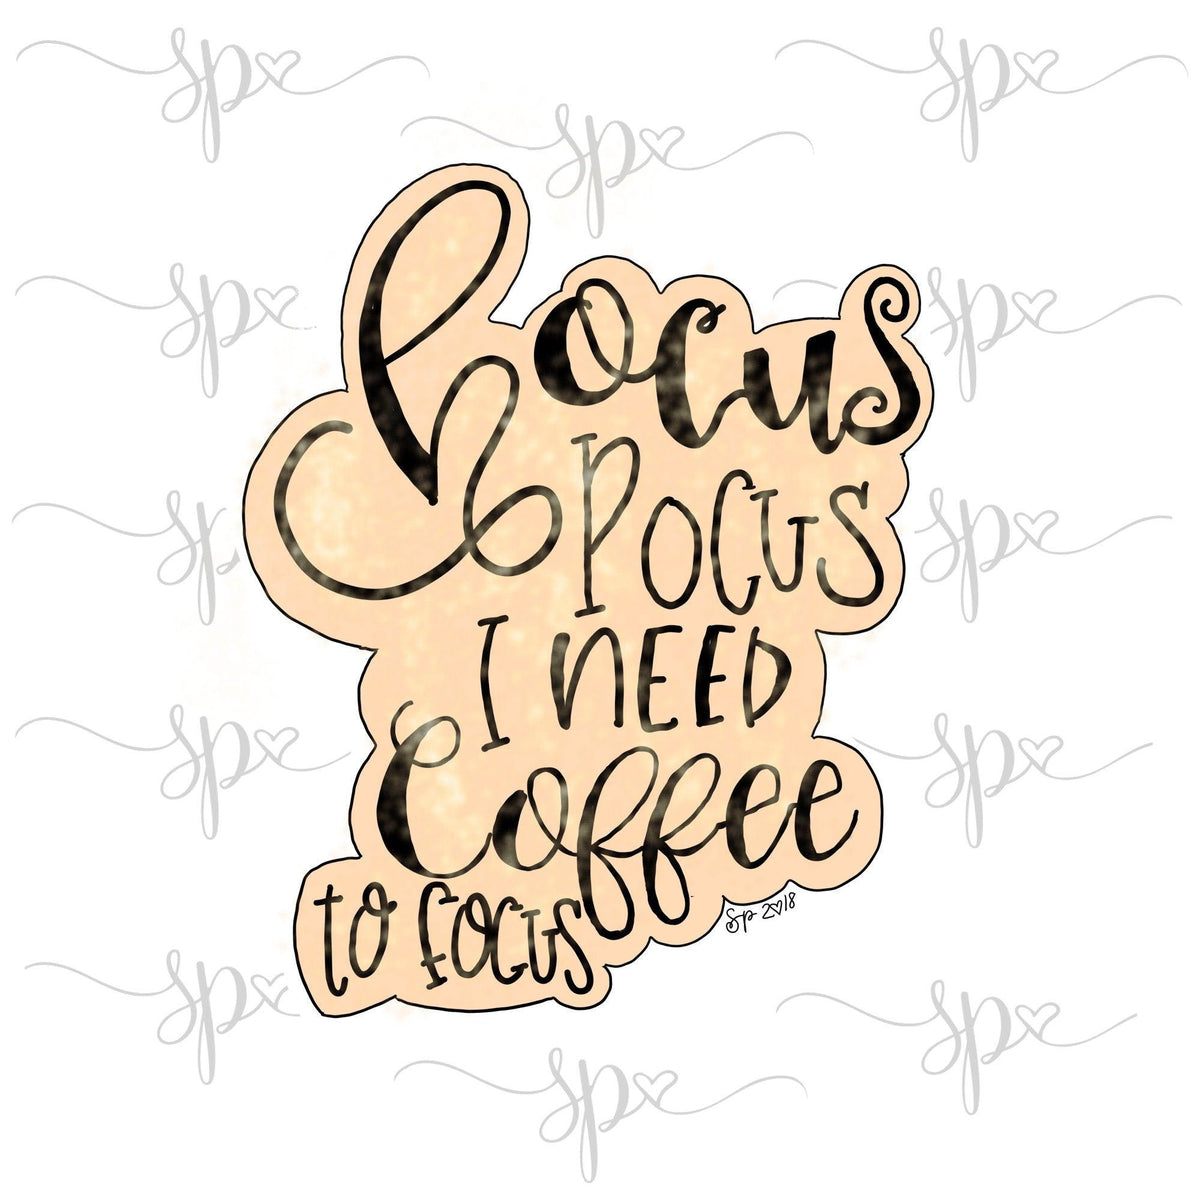 Hocus Pocus I Need Coffee to Focus Hand Lettered Cookie Cutter (Version with coffee cup) - Sweetleigh 